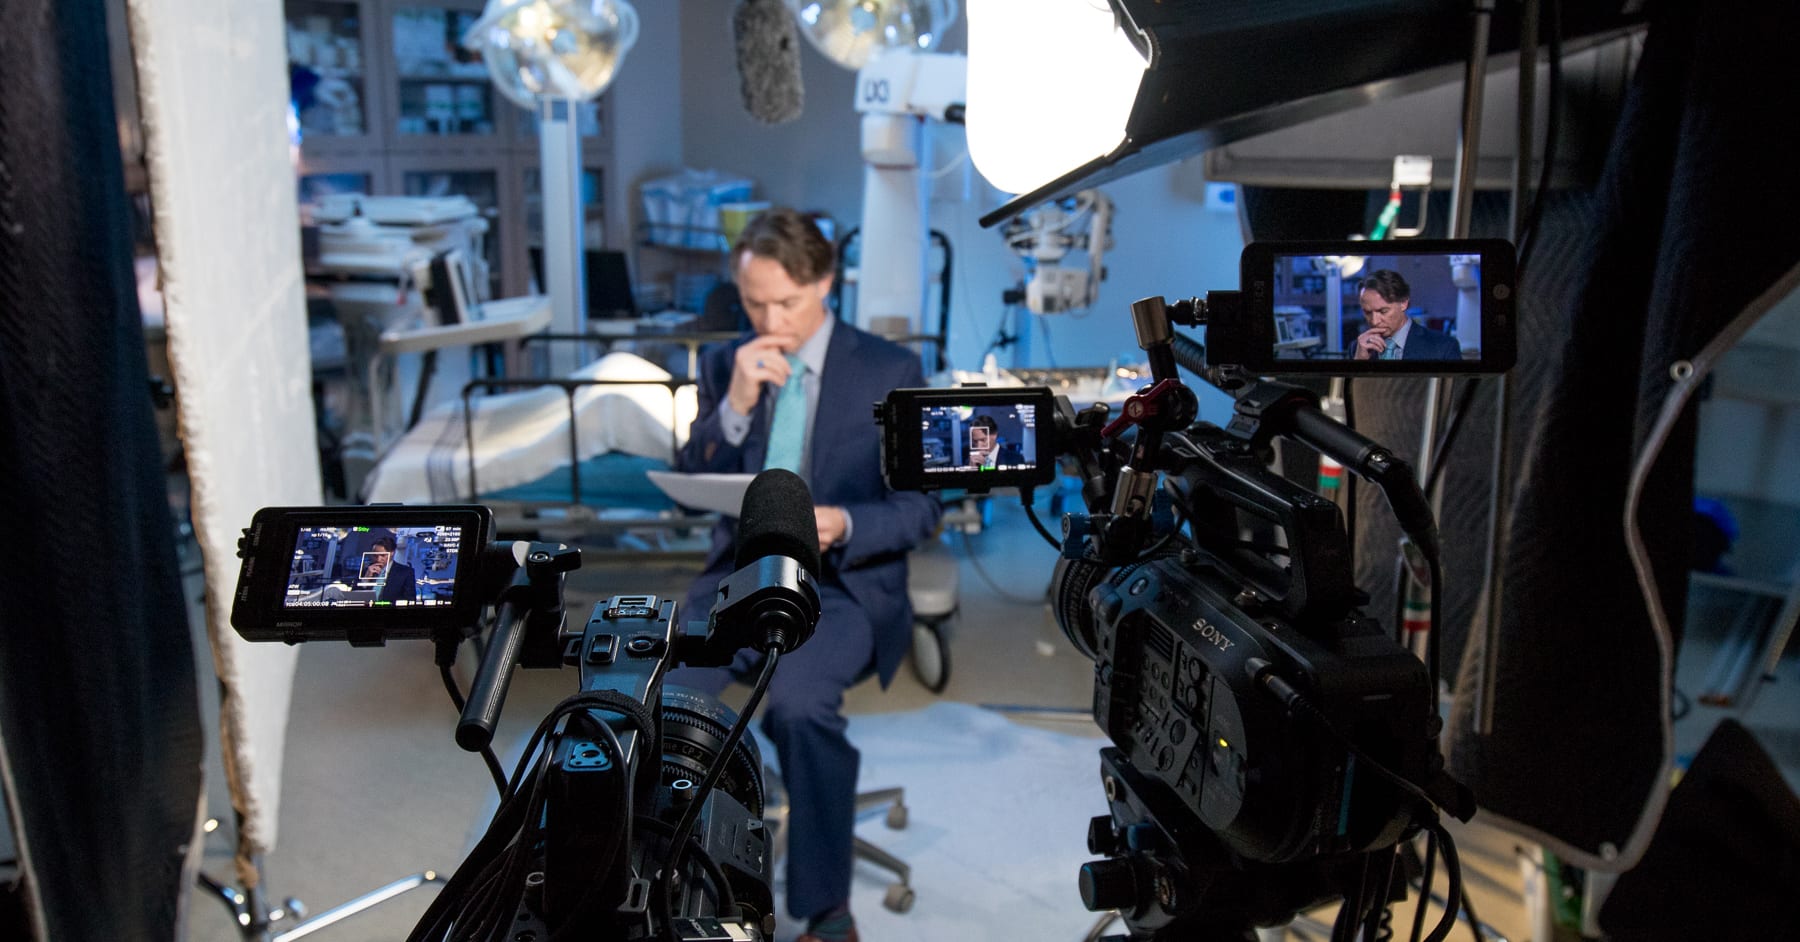 3 Reasons Why Your Medical Practice Needs Video